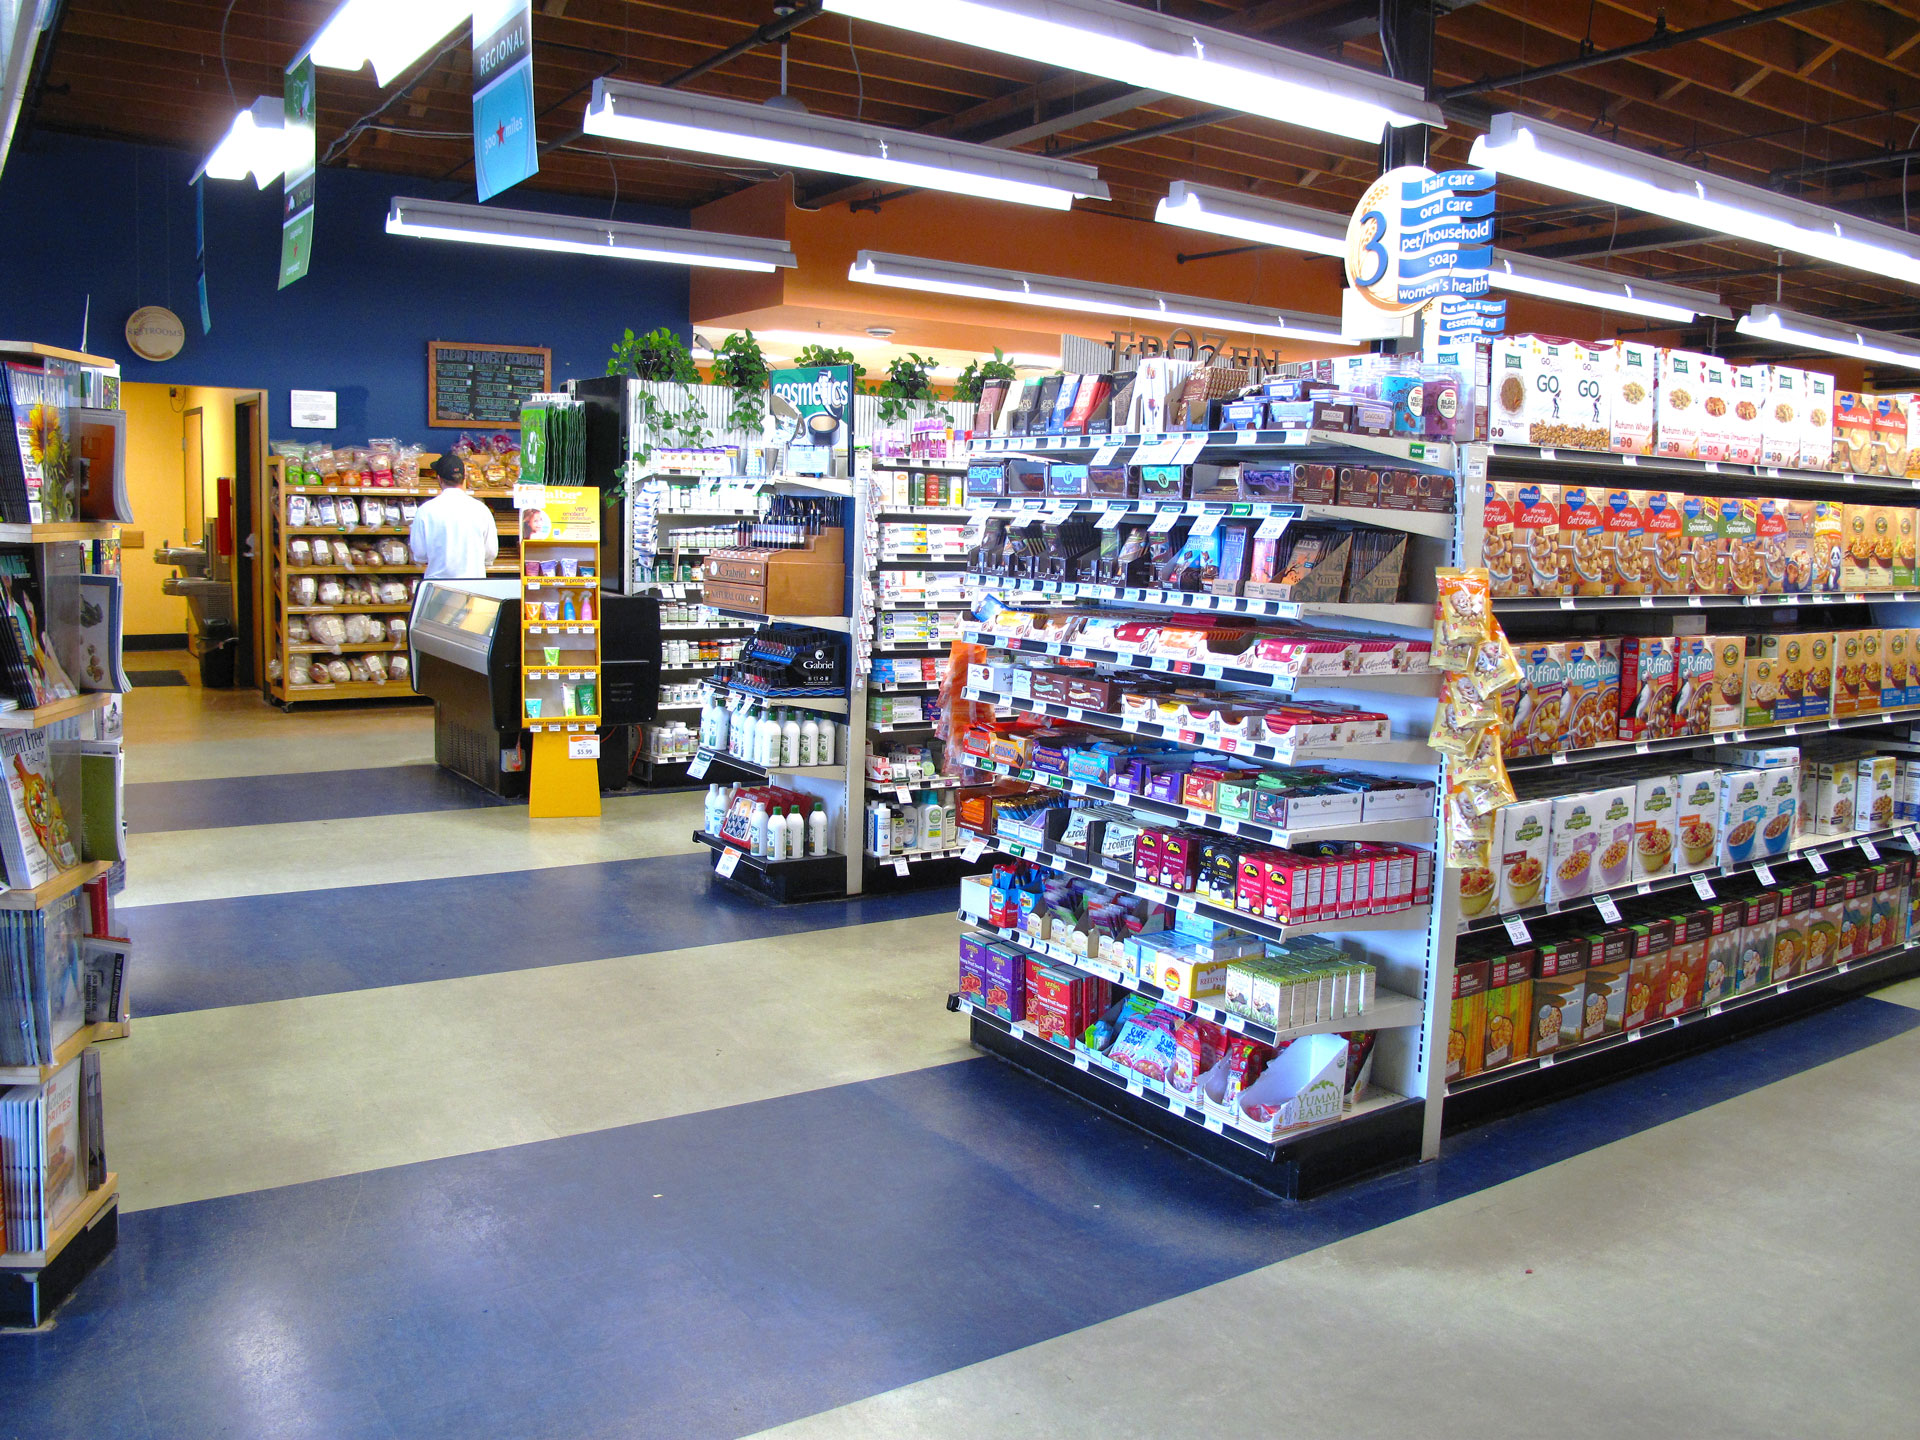 A grocery store aisle at Whole Foods Coop Duluth MN with shelves stocked with various food items, cereals, and household products. The aisle is clean and well-lit with signs for different sections. A person in the distance appears to be working or shopping near the checkout area.